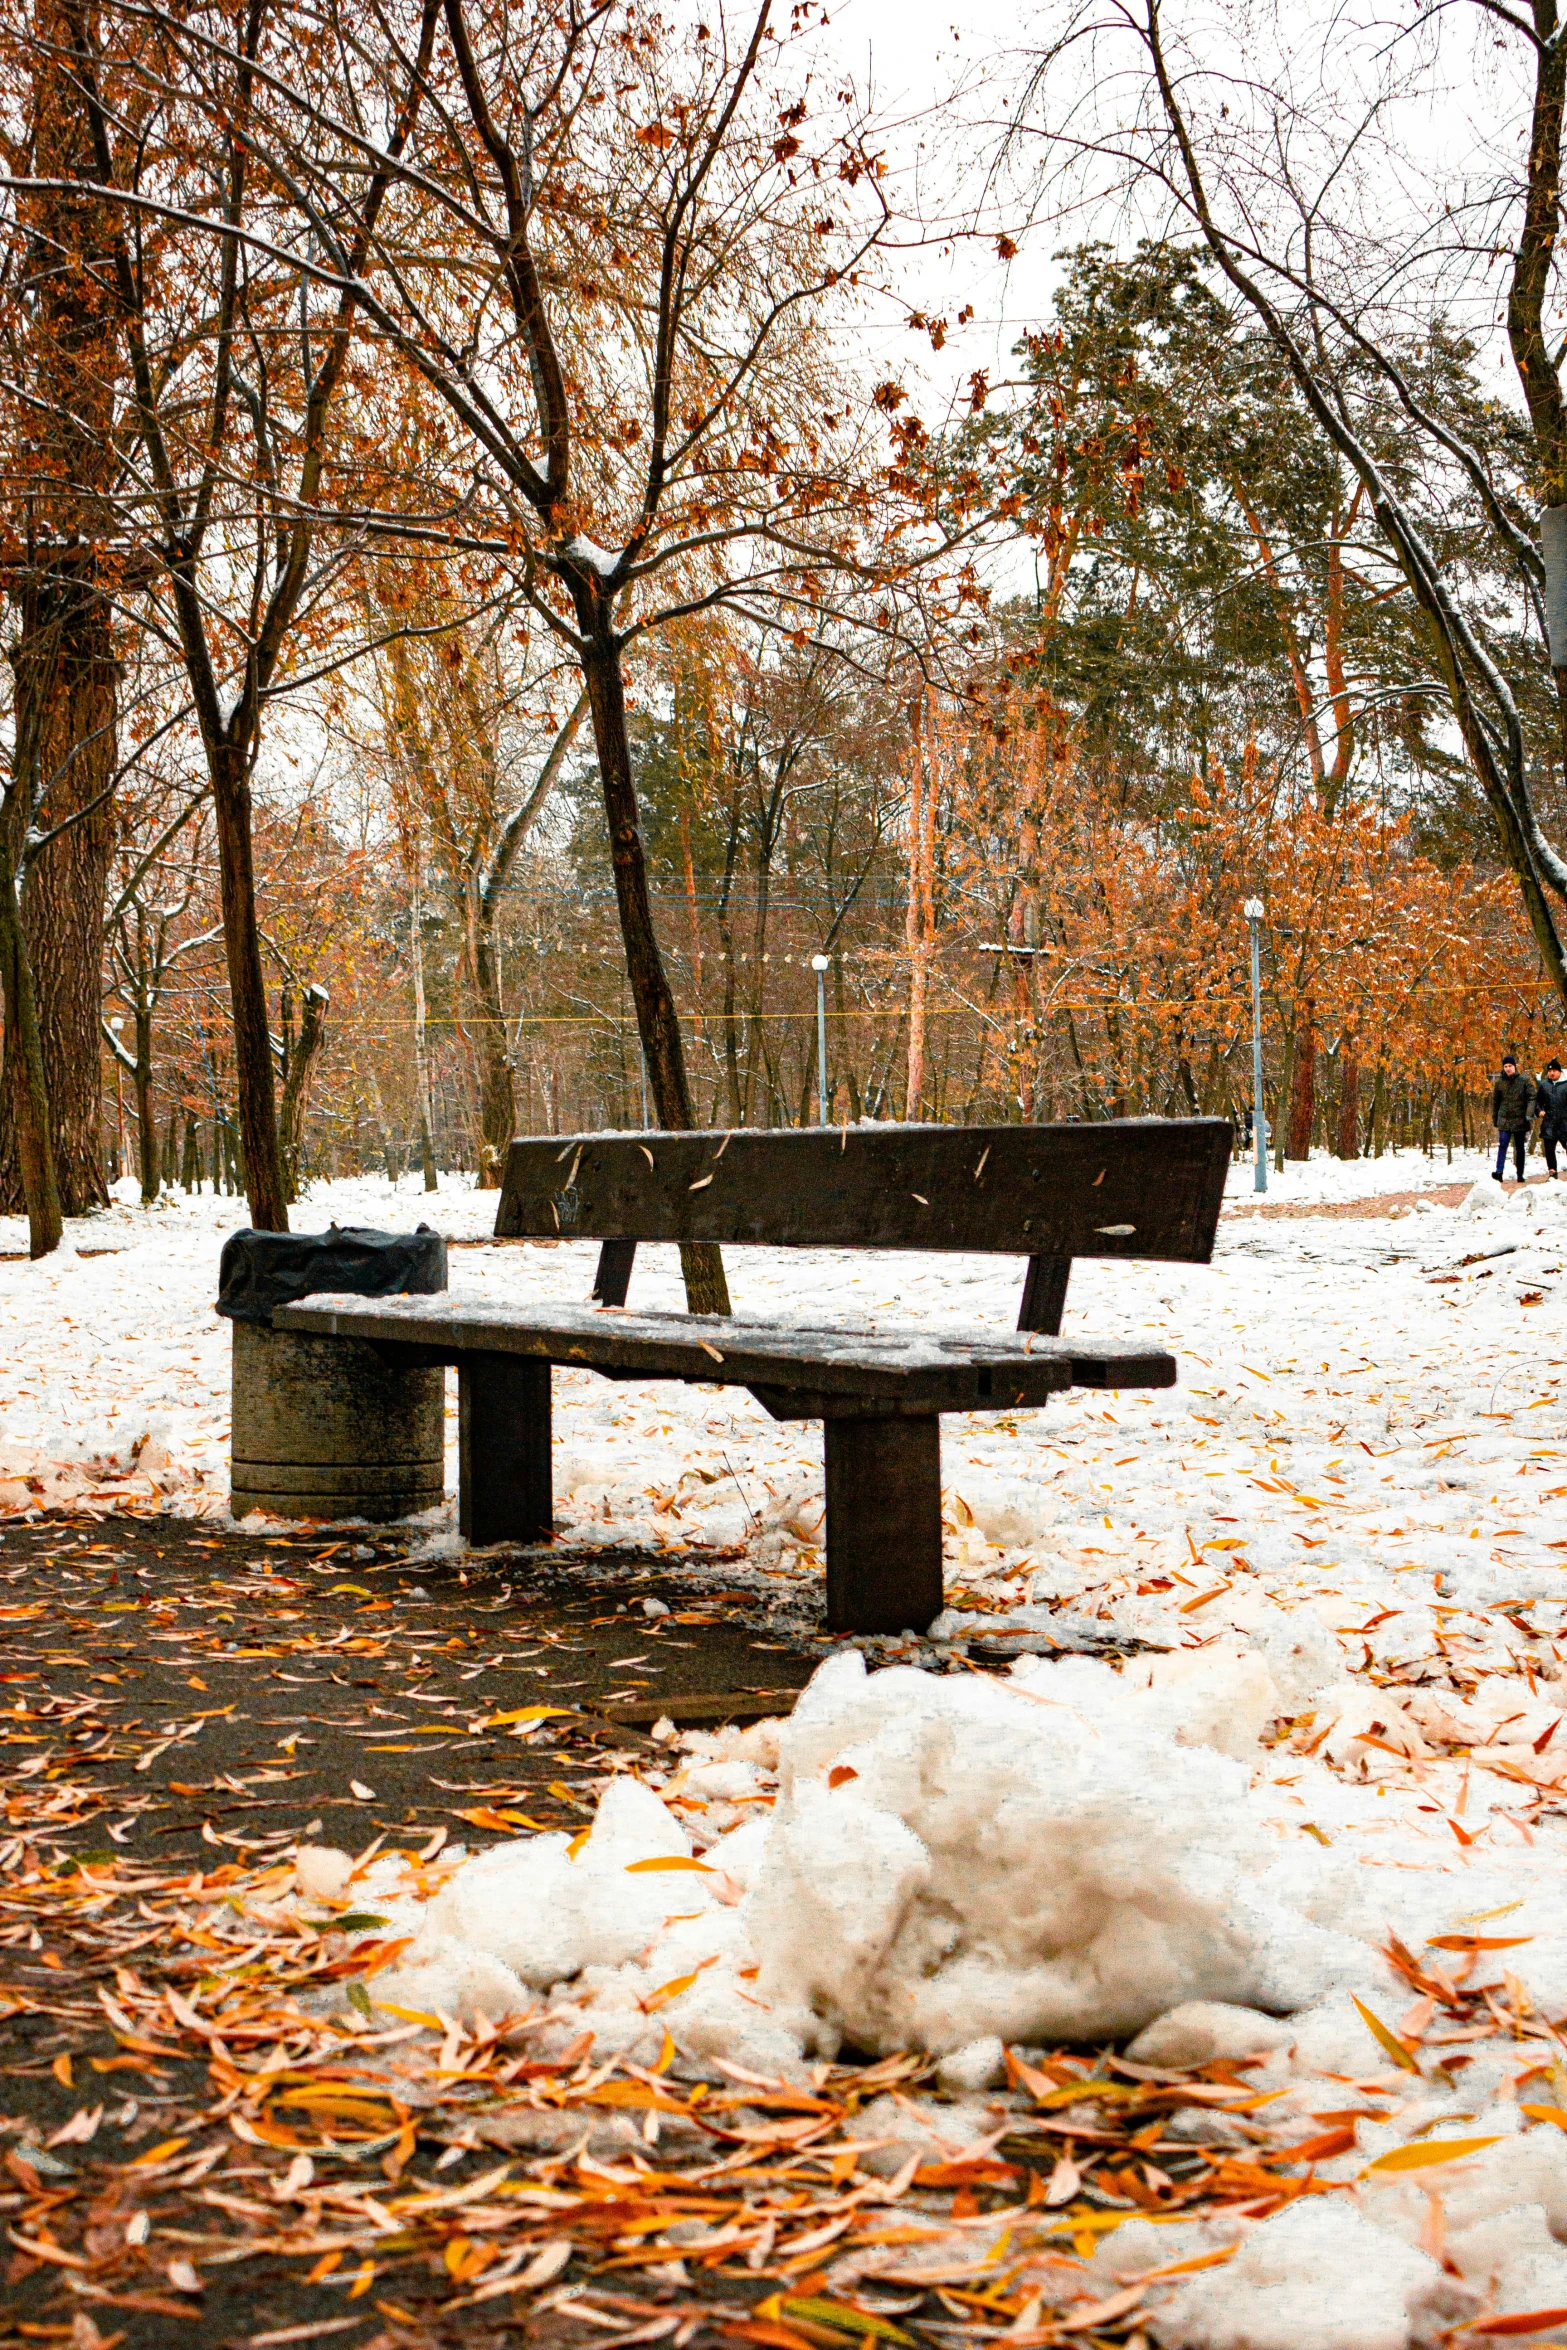 snow covers two park benches and some trees